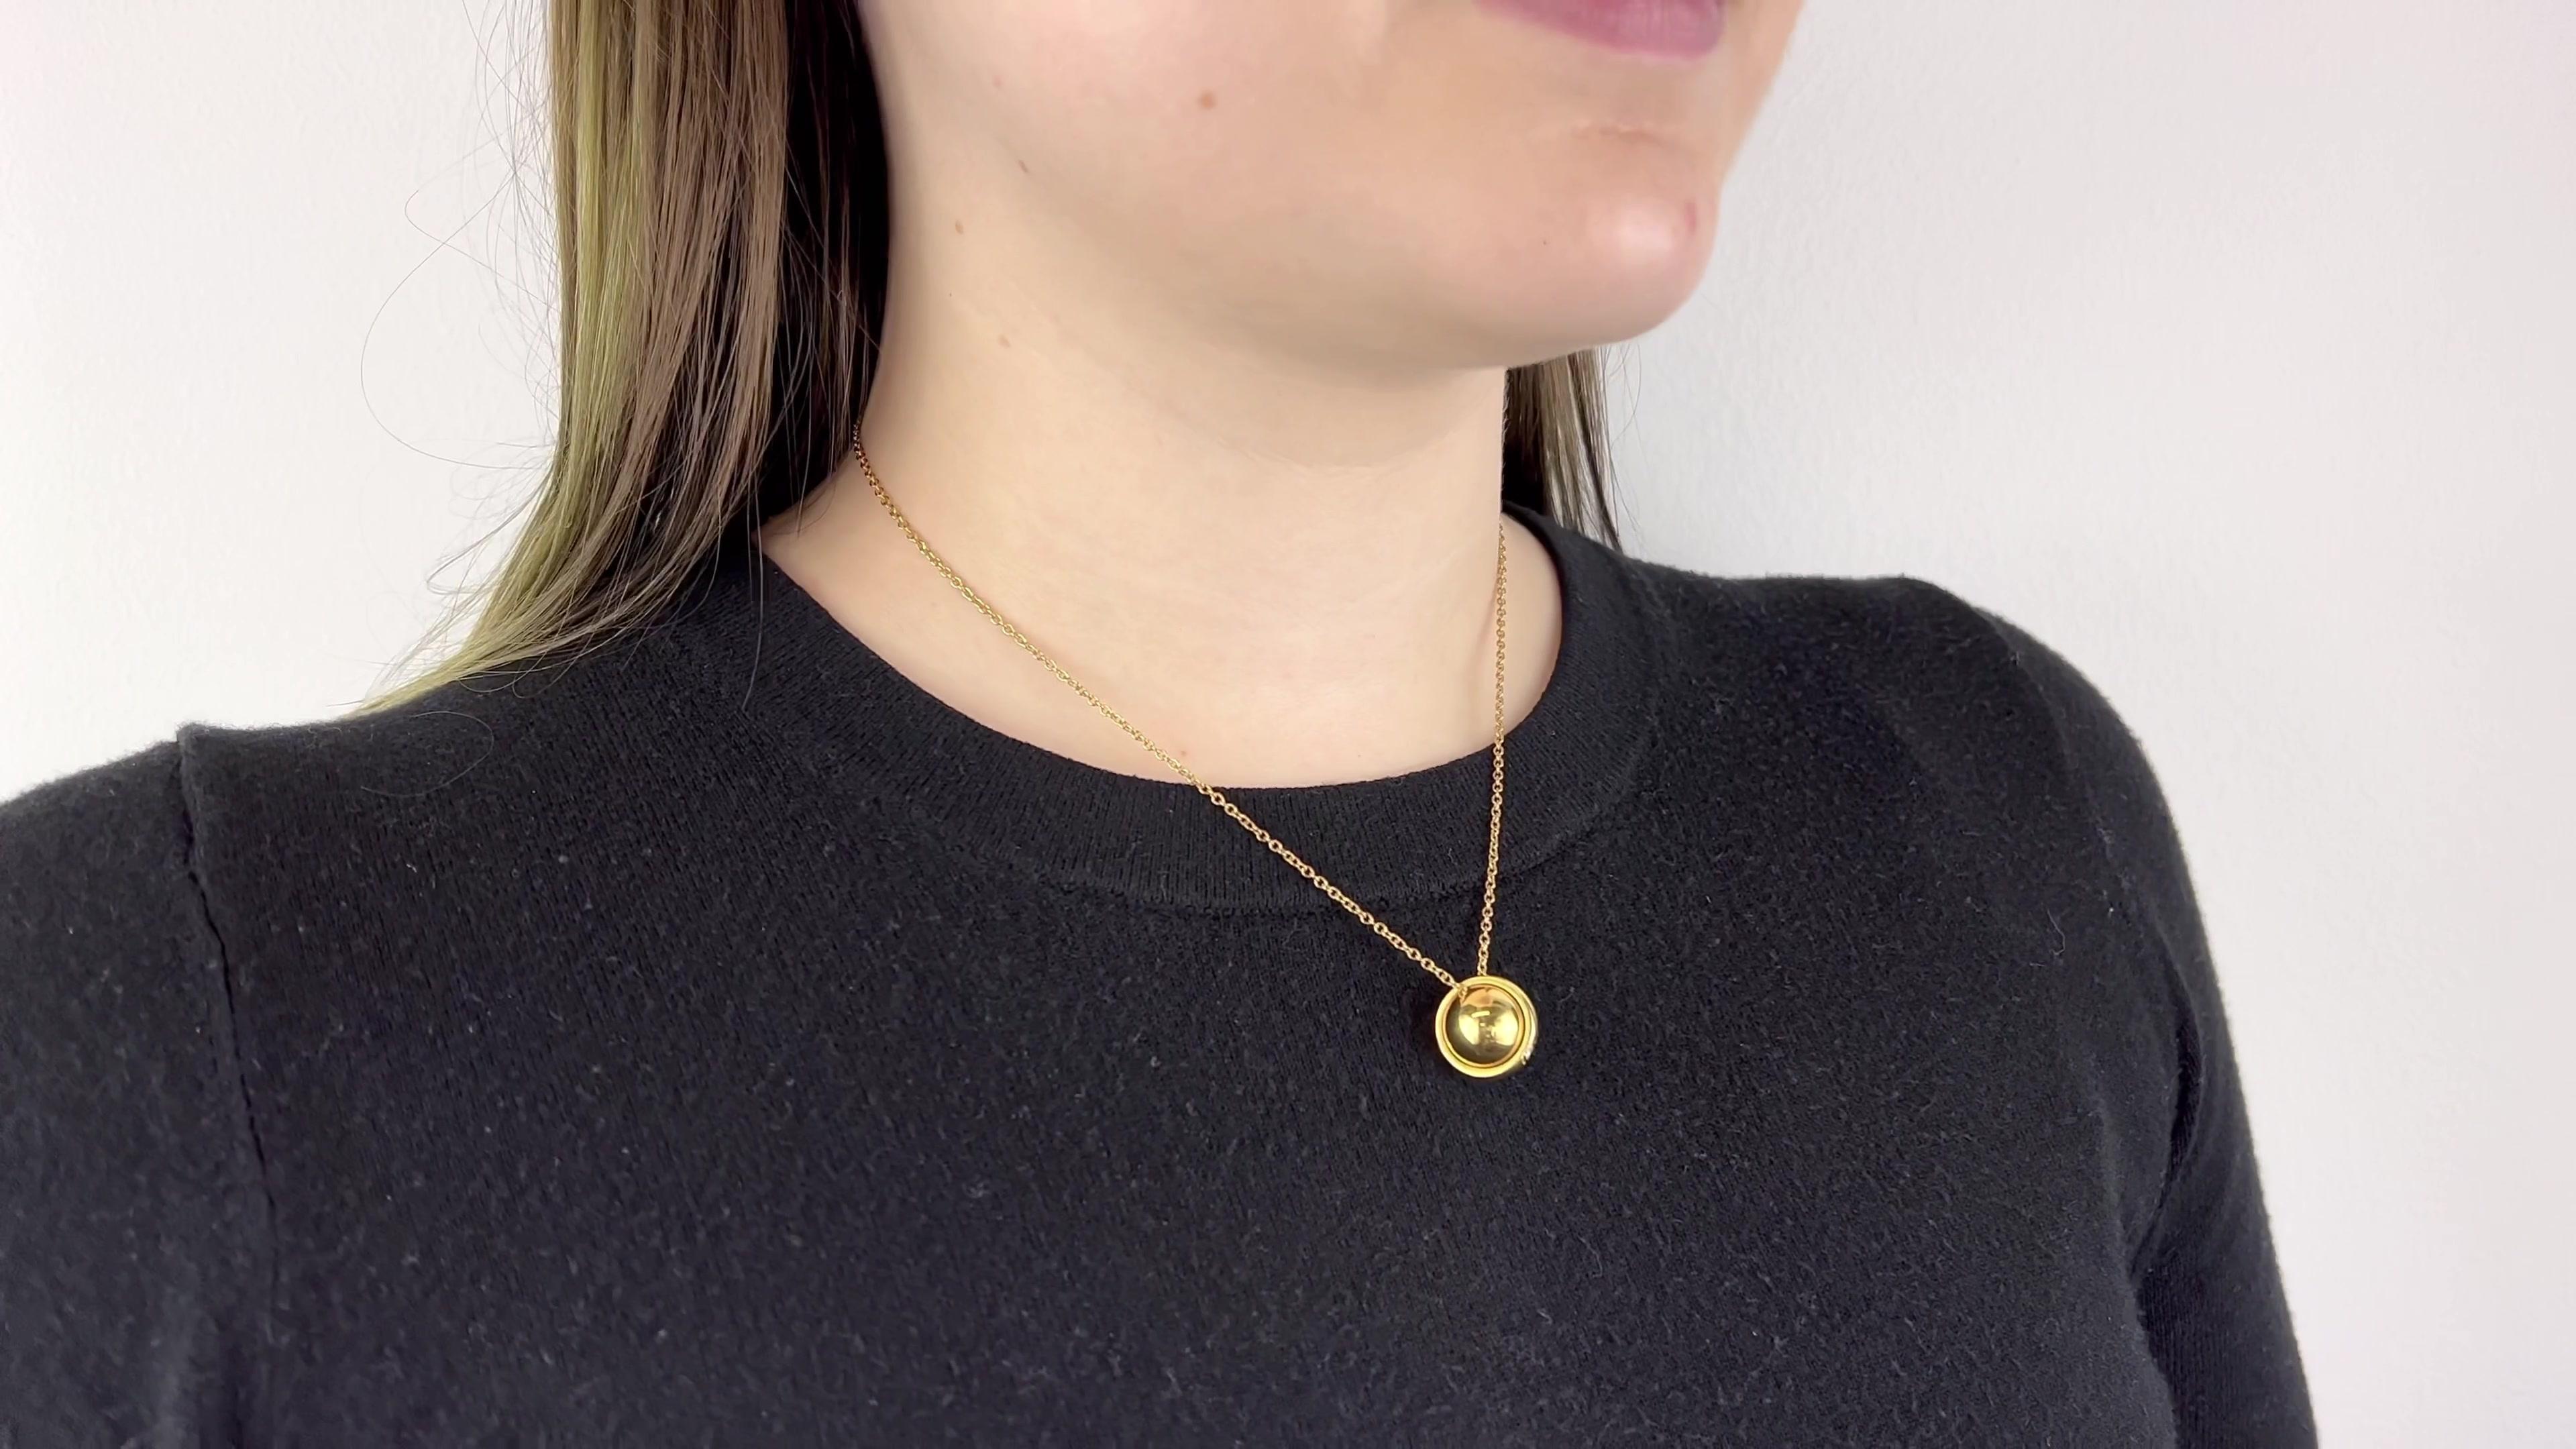 One Piaget Possession Diamond 18 Karat Gold Necklace. Featuring one round brilliant cut diamond of approximately 0.45 carat, graded D color, VVS clarity. Crafted in 18 karat yellow gold, signed Piaget, #B7S222, with Italian hallmarks. Circa 2000s.